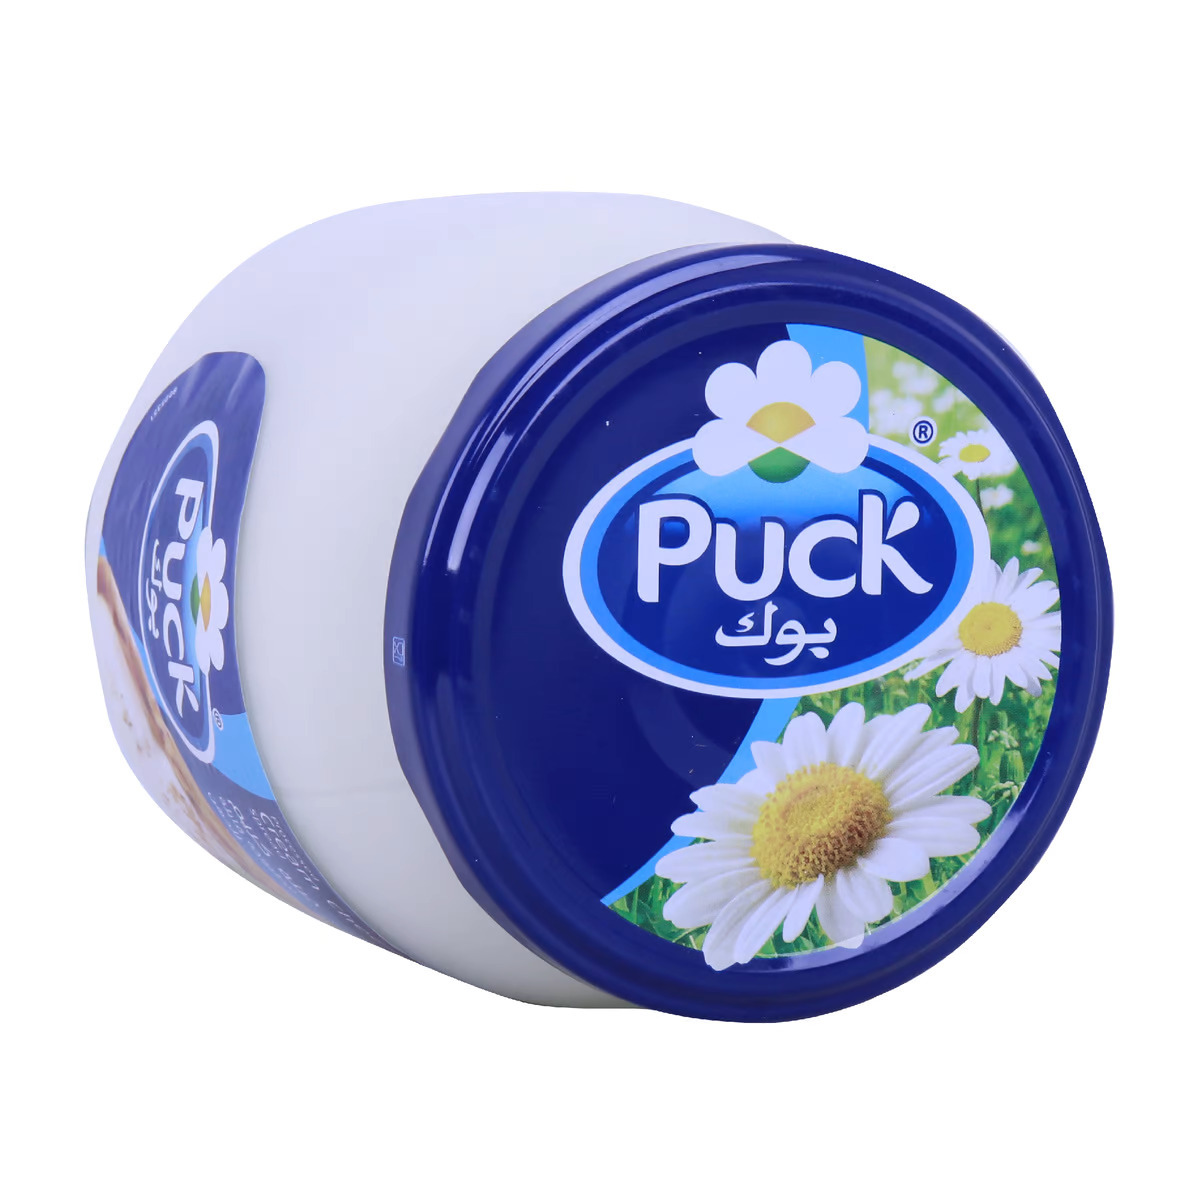 Puck Processed Cream Cheese Value Pack 500g